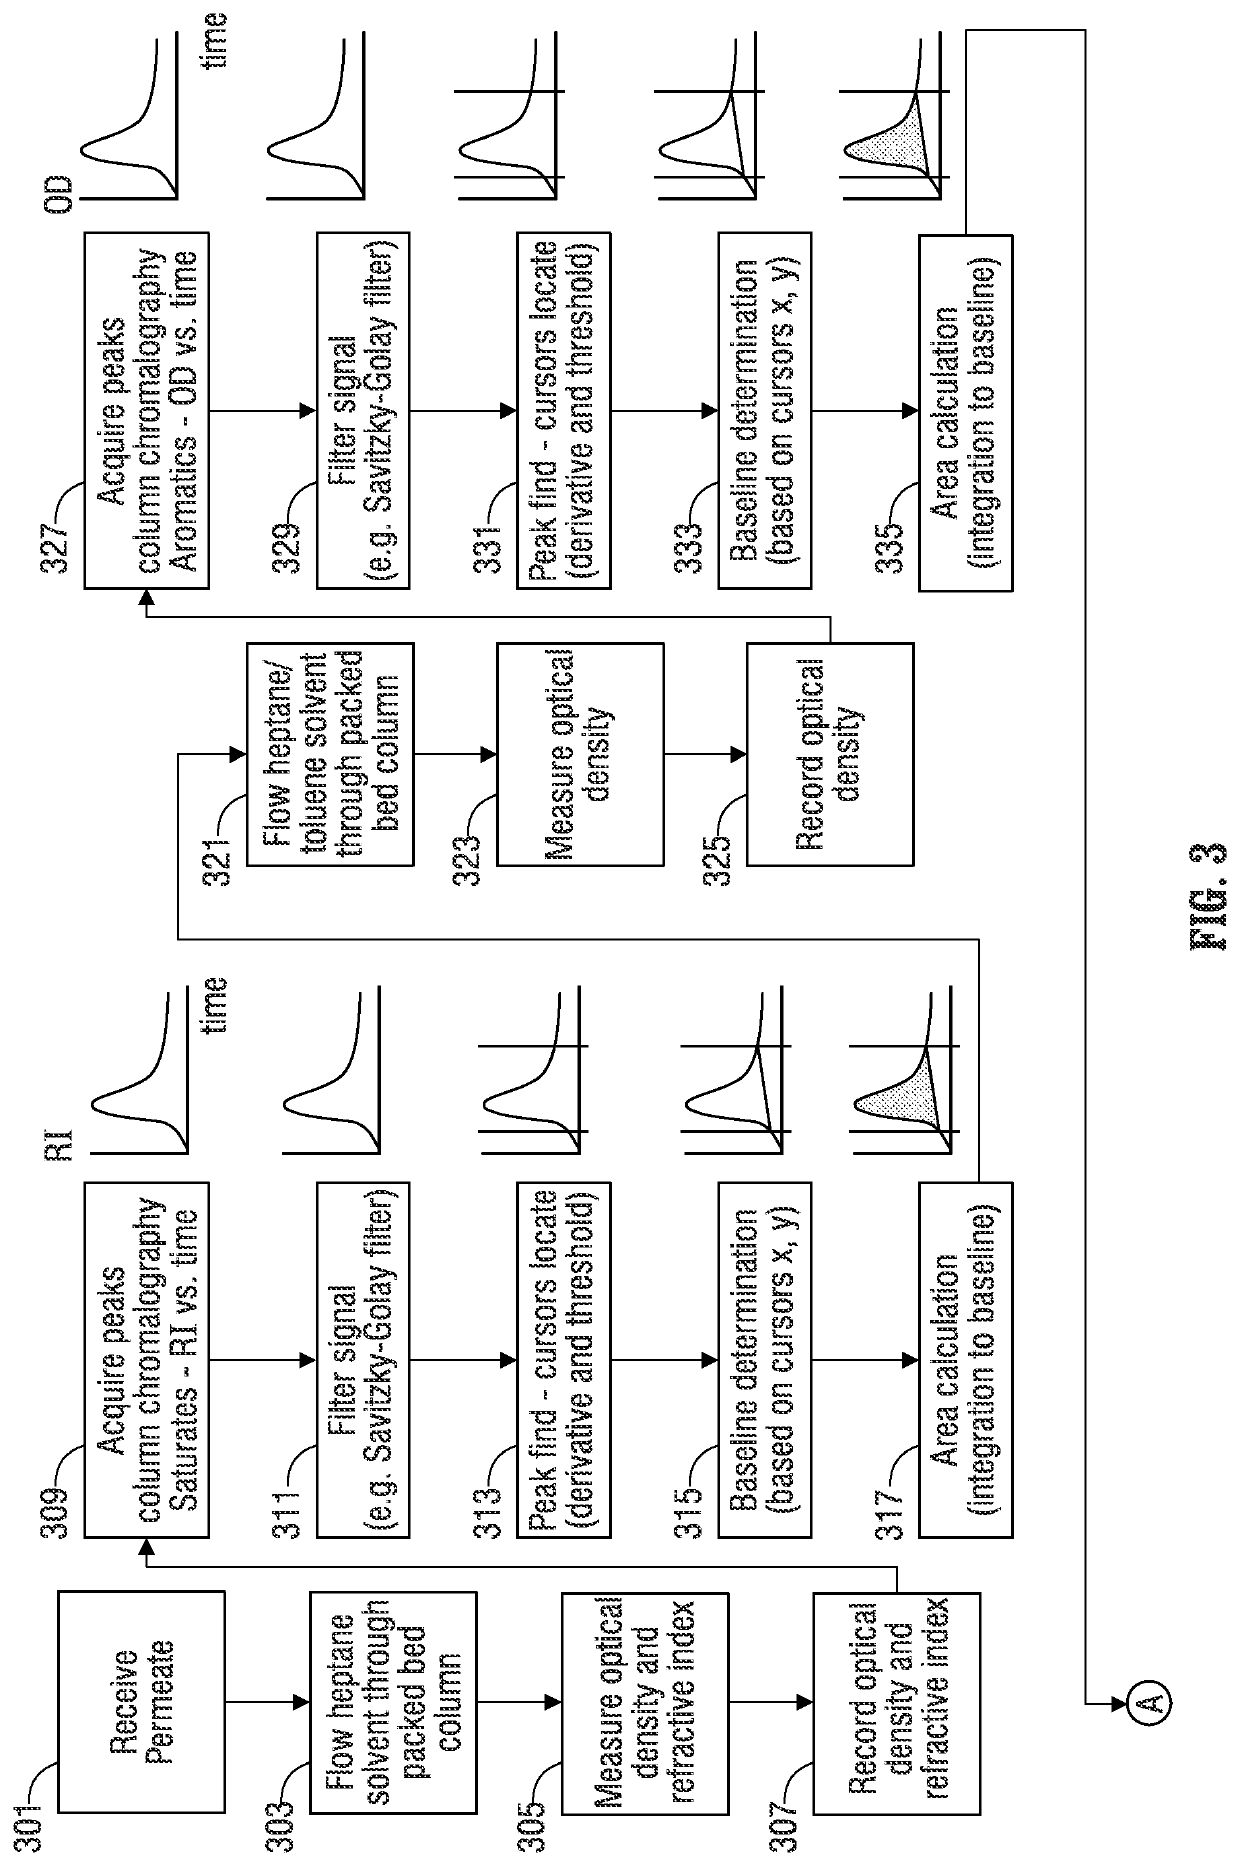 Automated method and apparatus for measuring saturate, aromatic, resin, and asphaltene fractions using microfluidics and spectroscopy